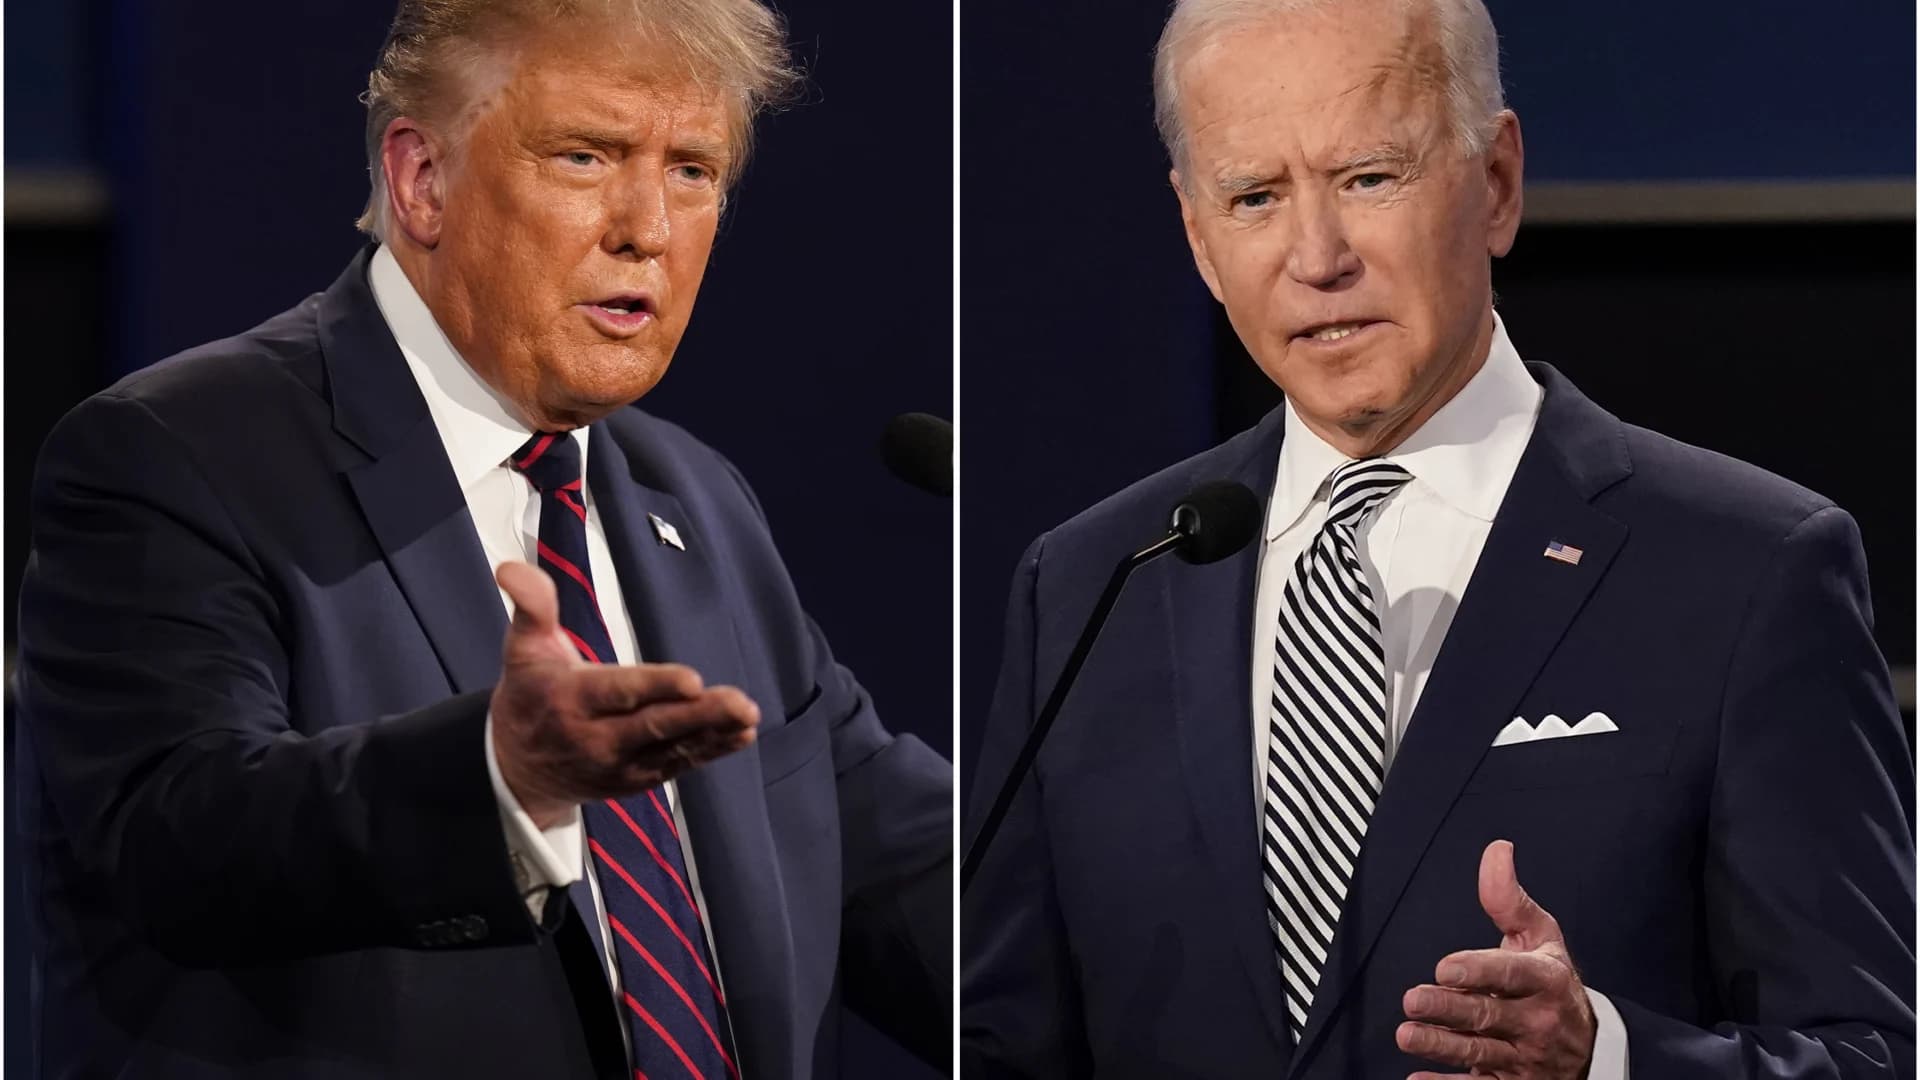 Cheddar Poll: Biden Leads Trump as COVID Edges Economy as Voters' Top Issue